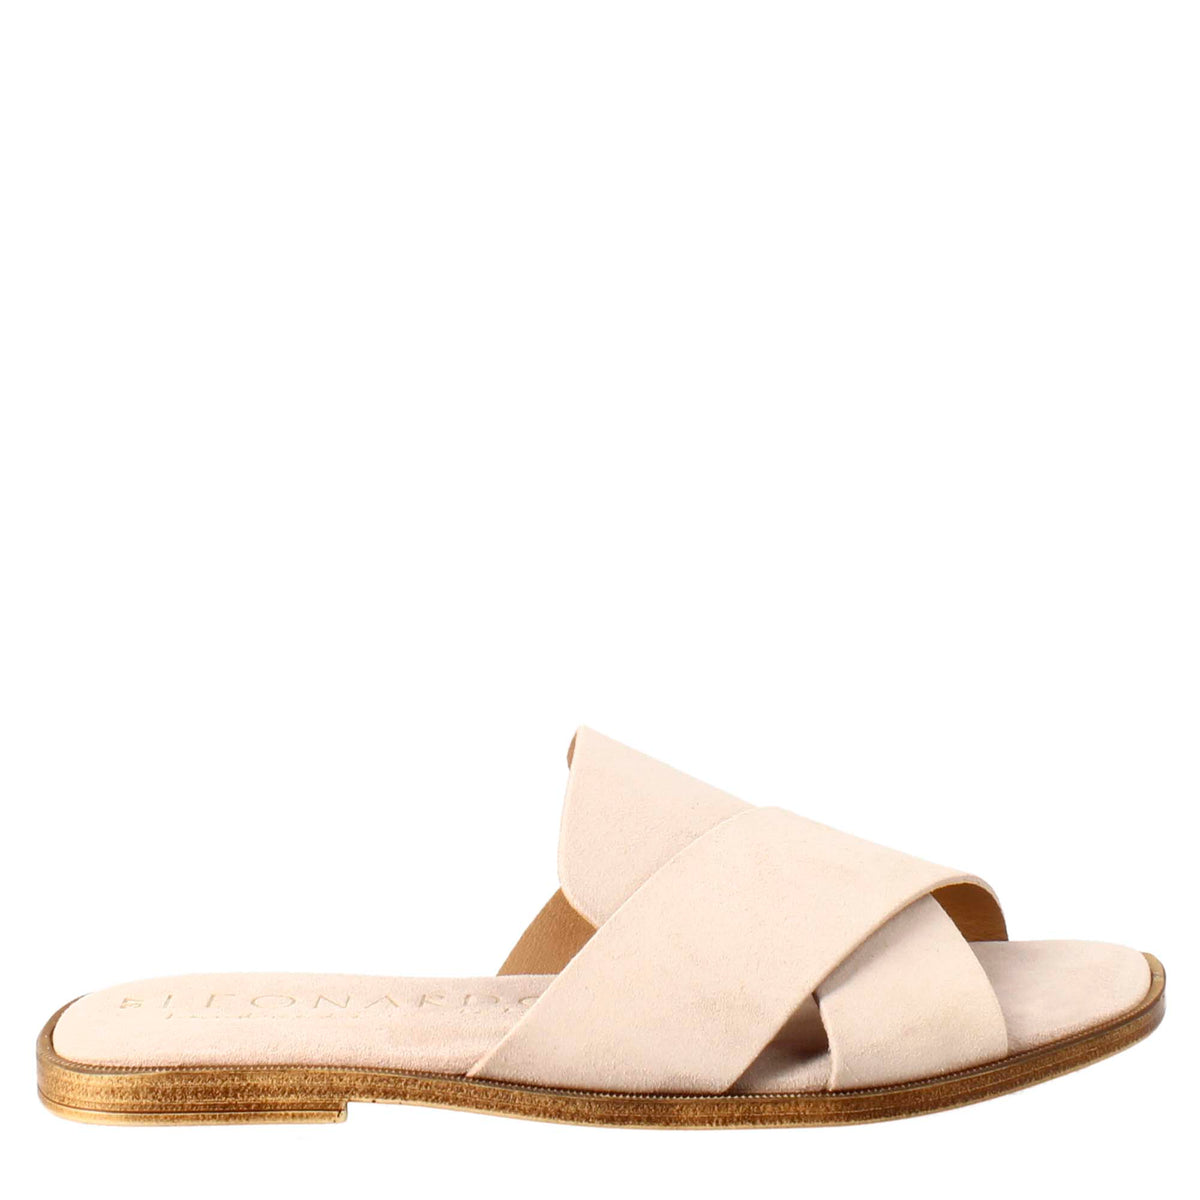 Double band sandal for woman in beige suede